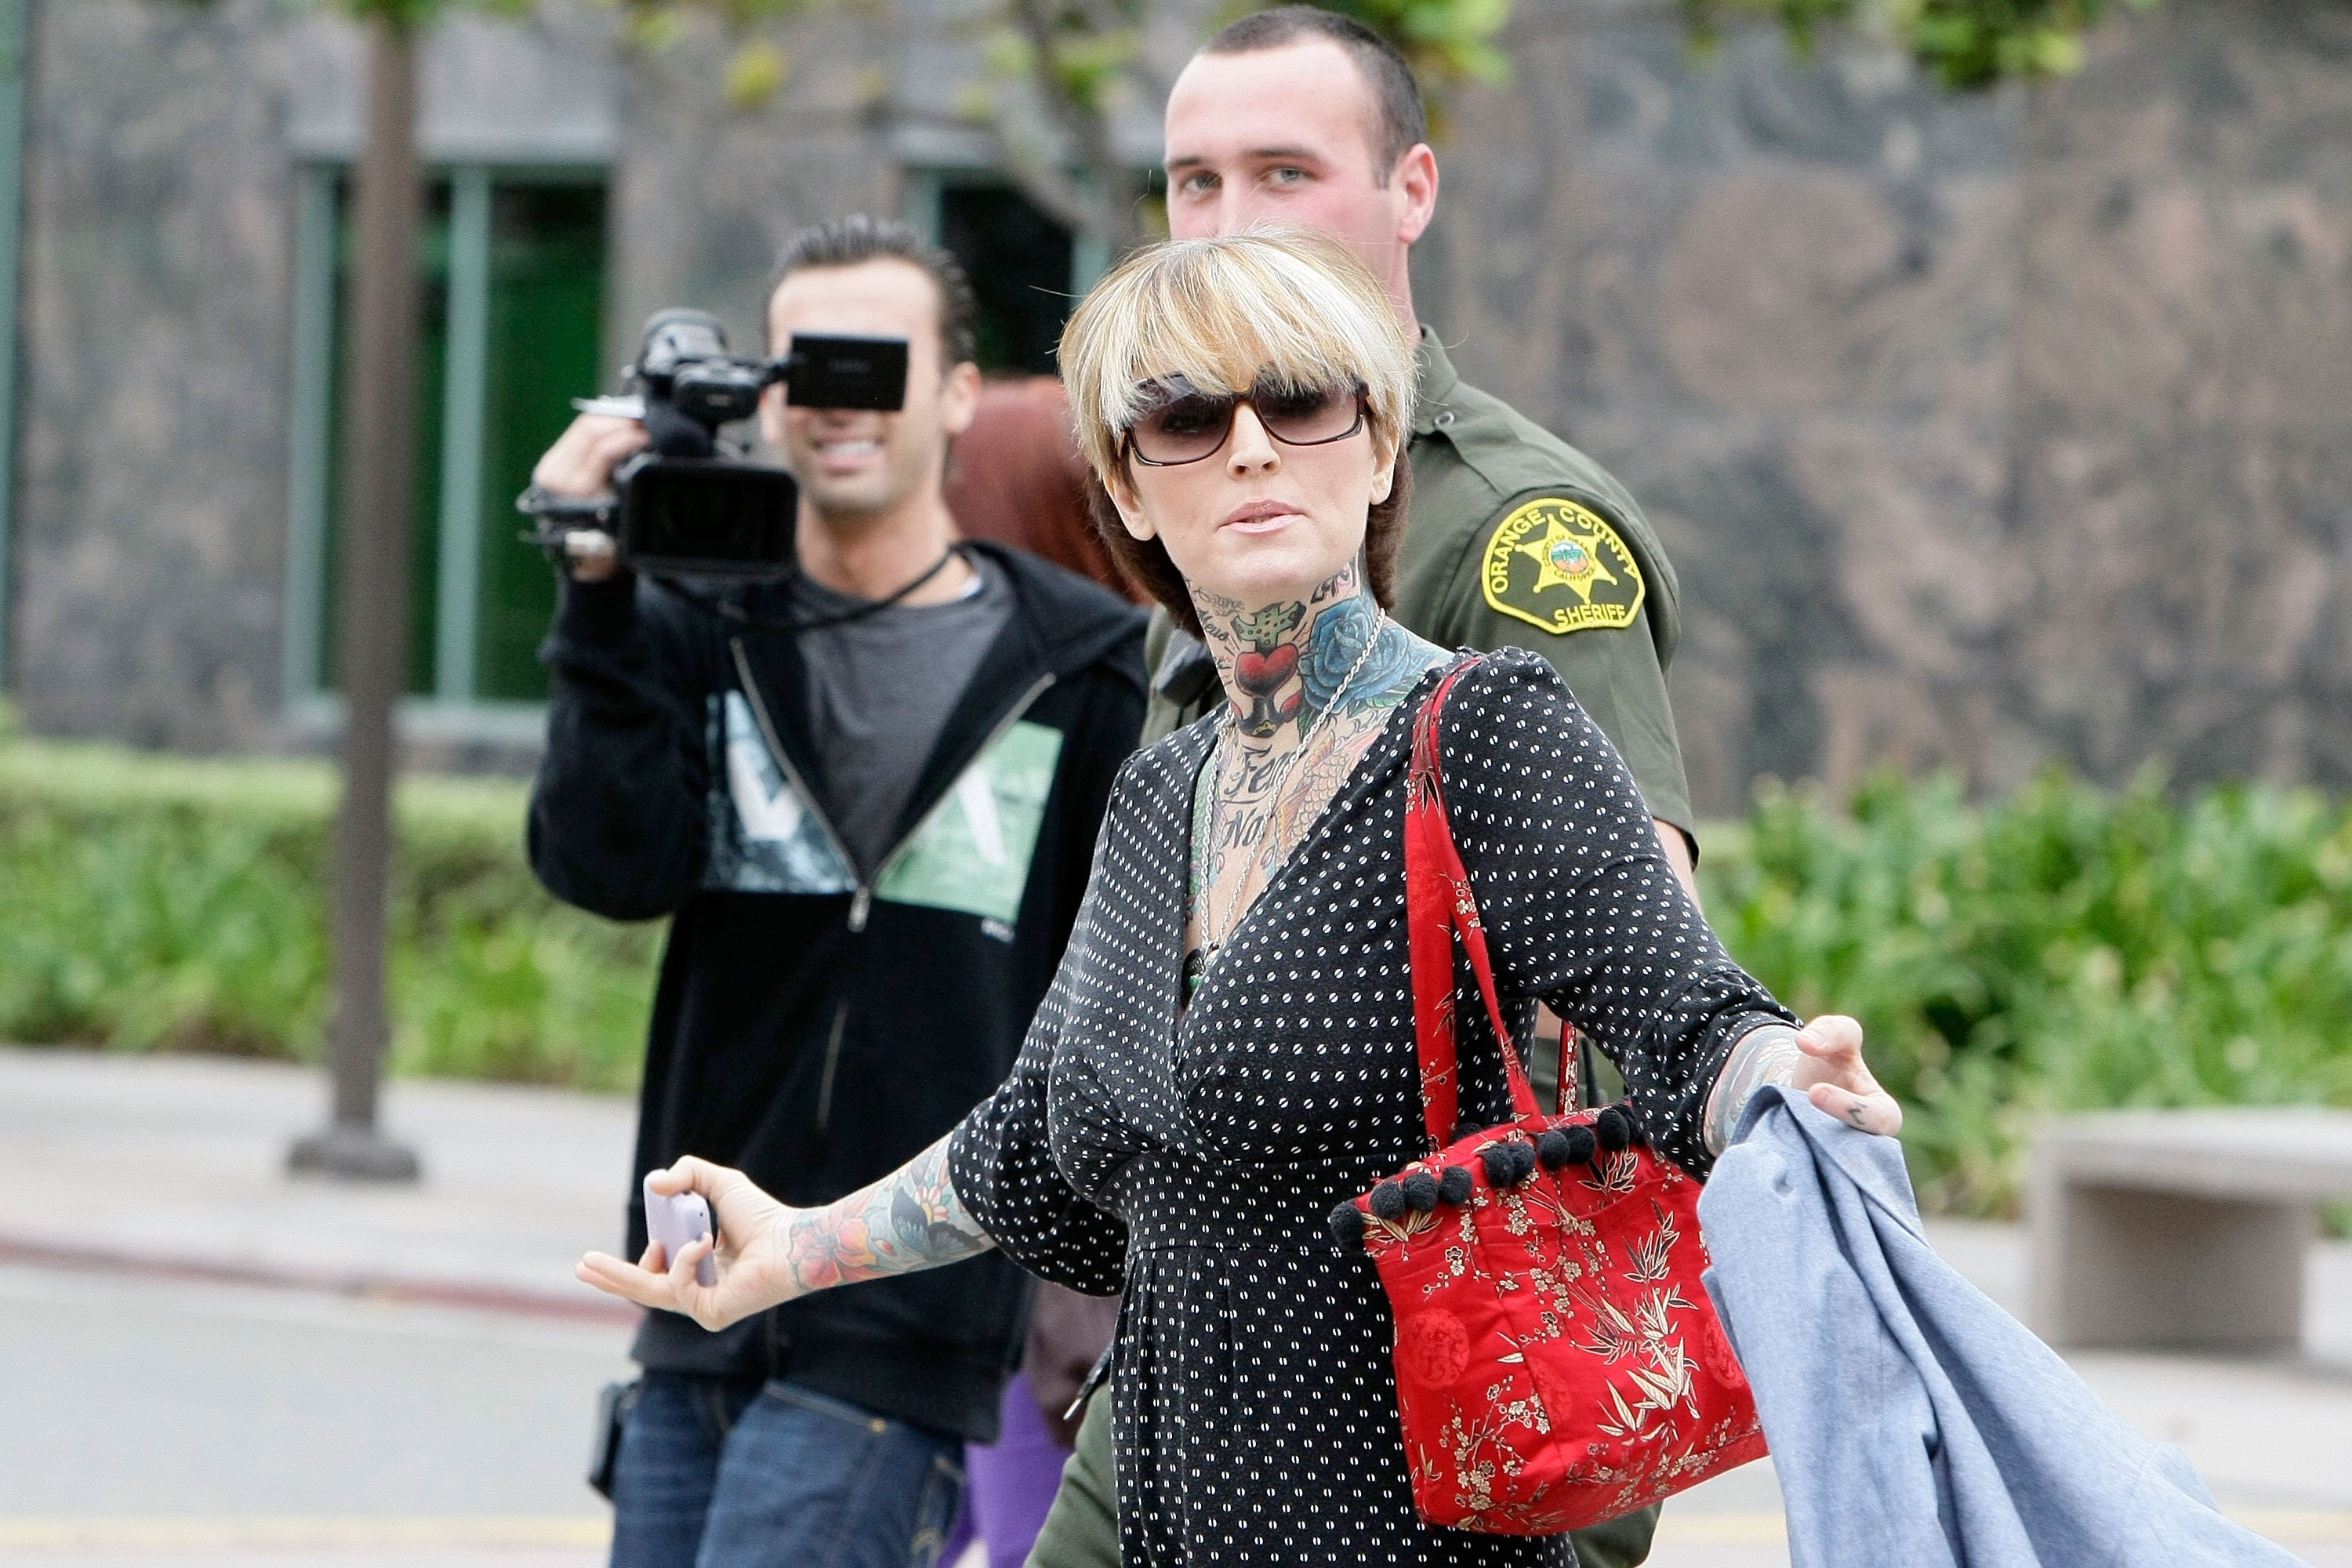 Janine Lindemulder is escorted into the Lamoreaux Justice Center by Orange County Sheriff Deputies during a child custody hearing on October 21, 2010 in Orange, California | Source: Getty Images 